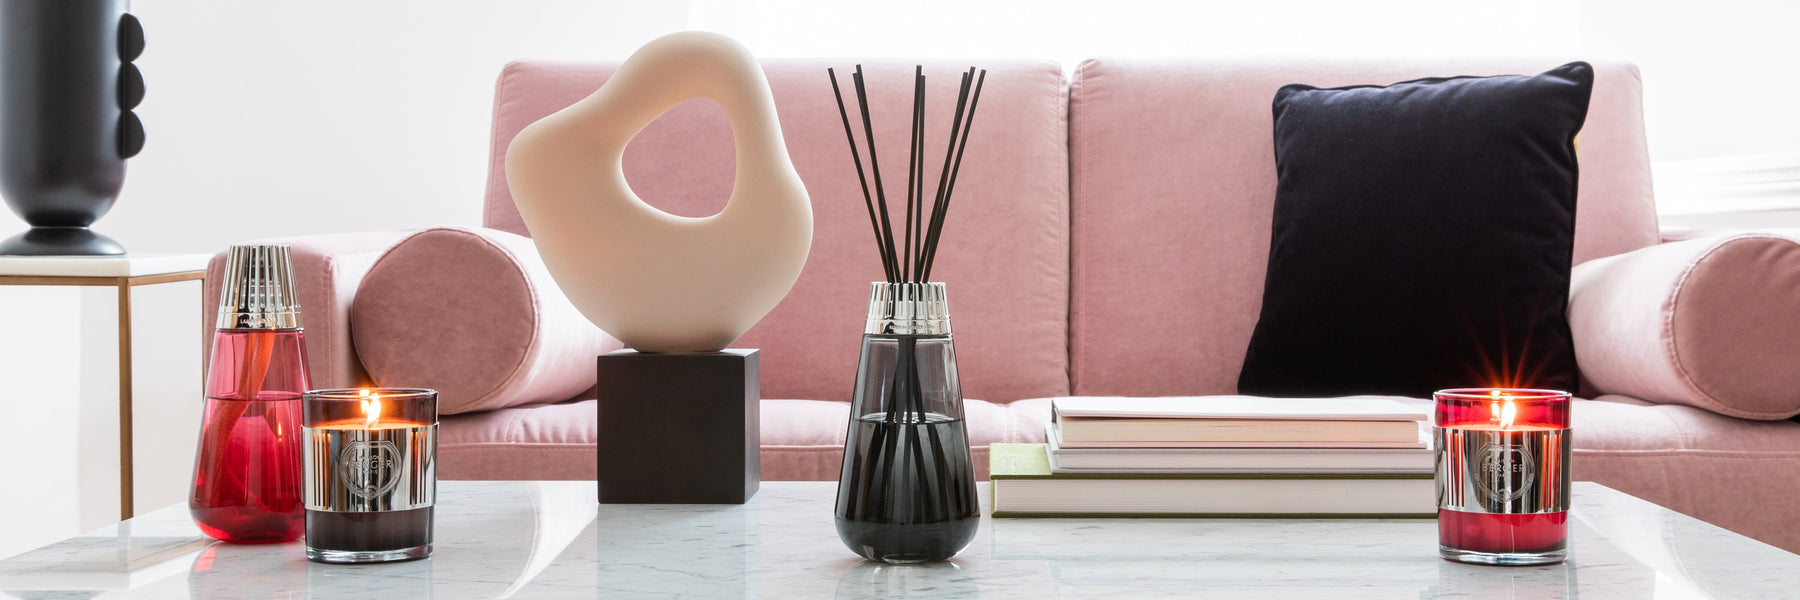 Maison Berger 101: How to use a Maison Berger Lamp